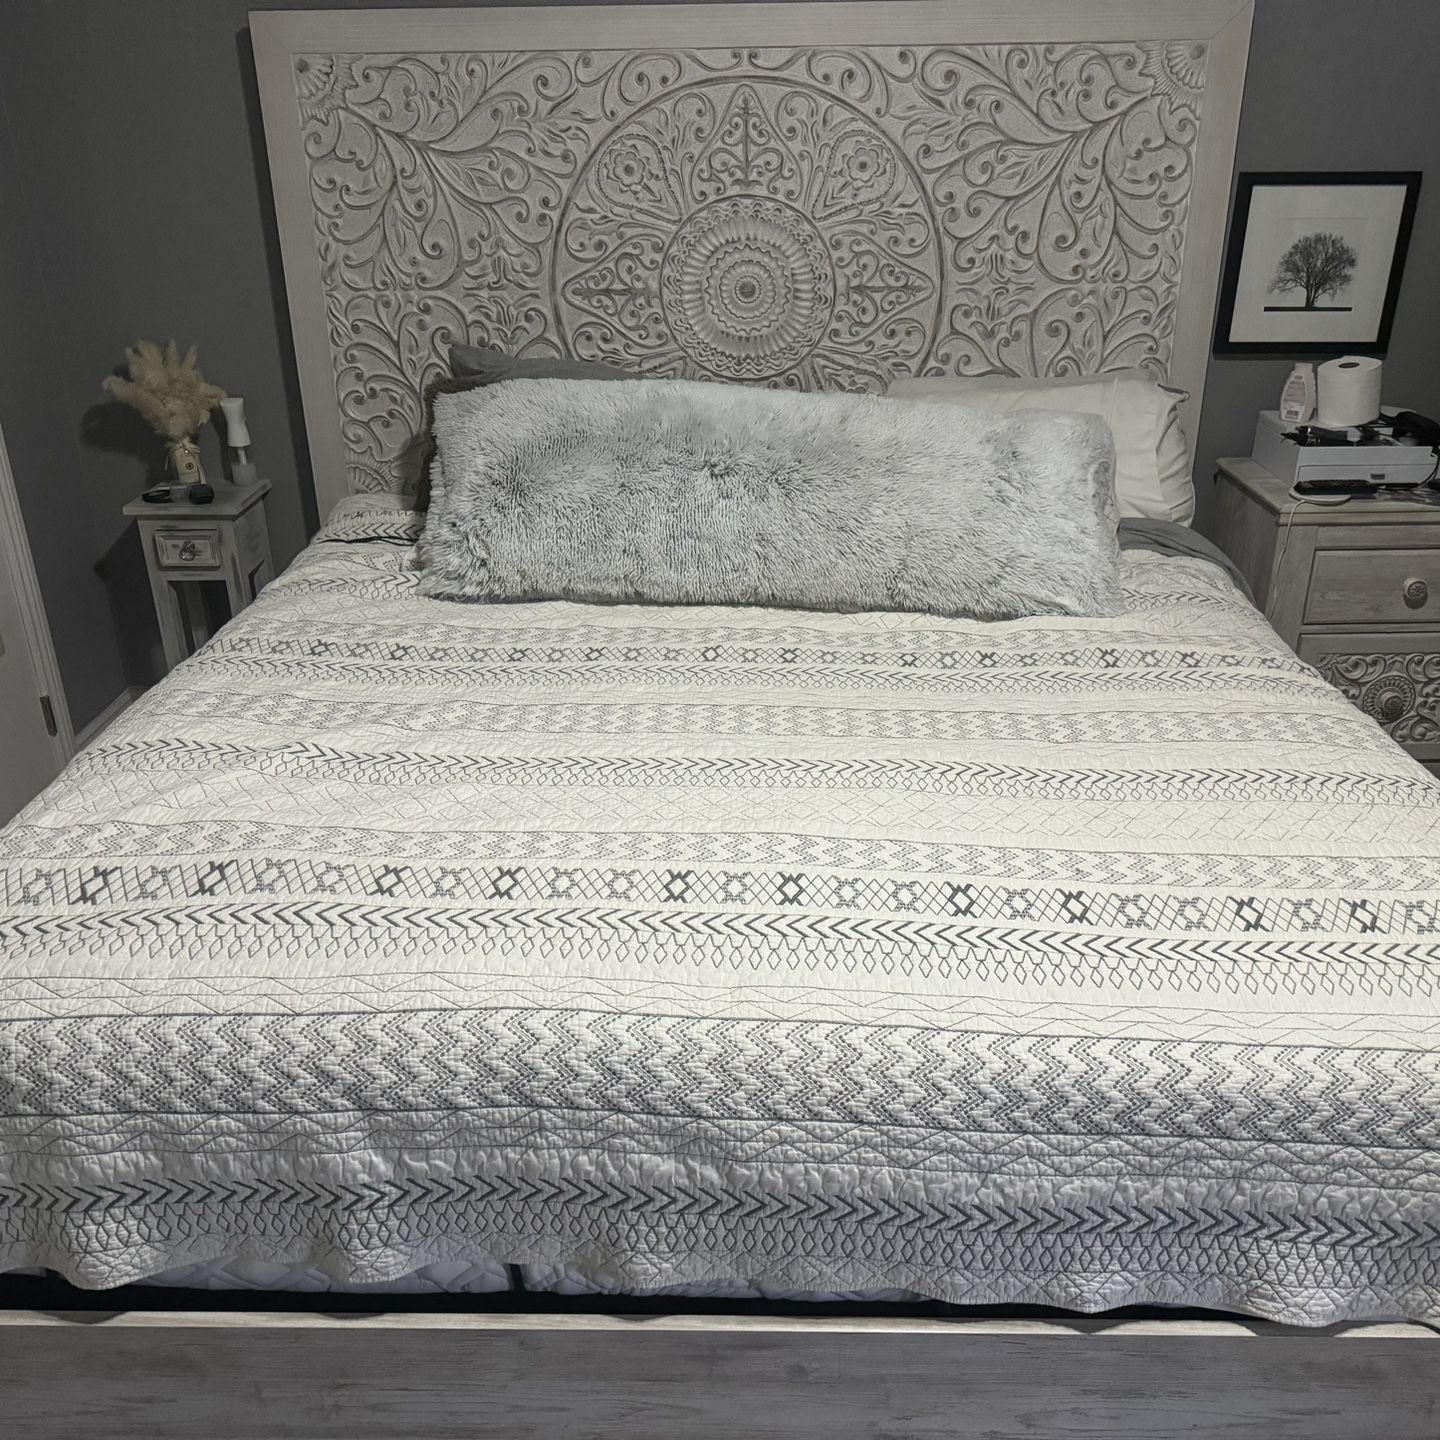 King Size Foam Bed With Headboard, Footboard, Sideboards And Dual Adjustable Base